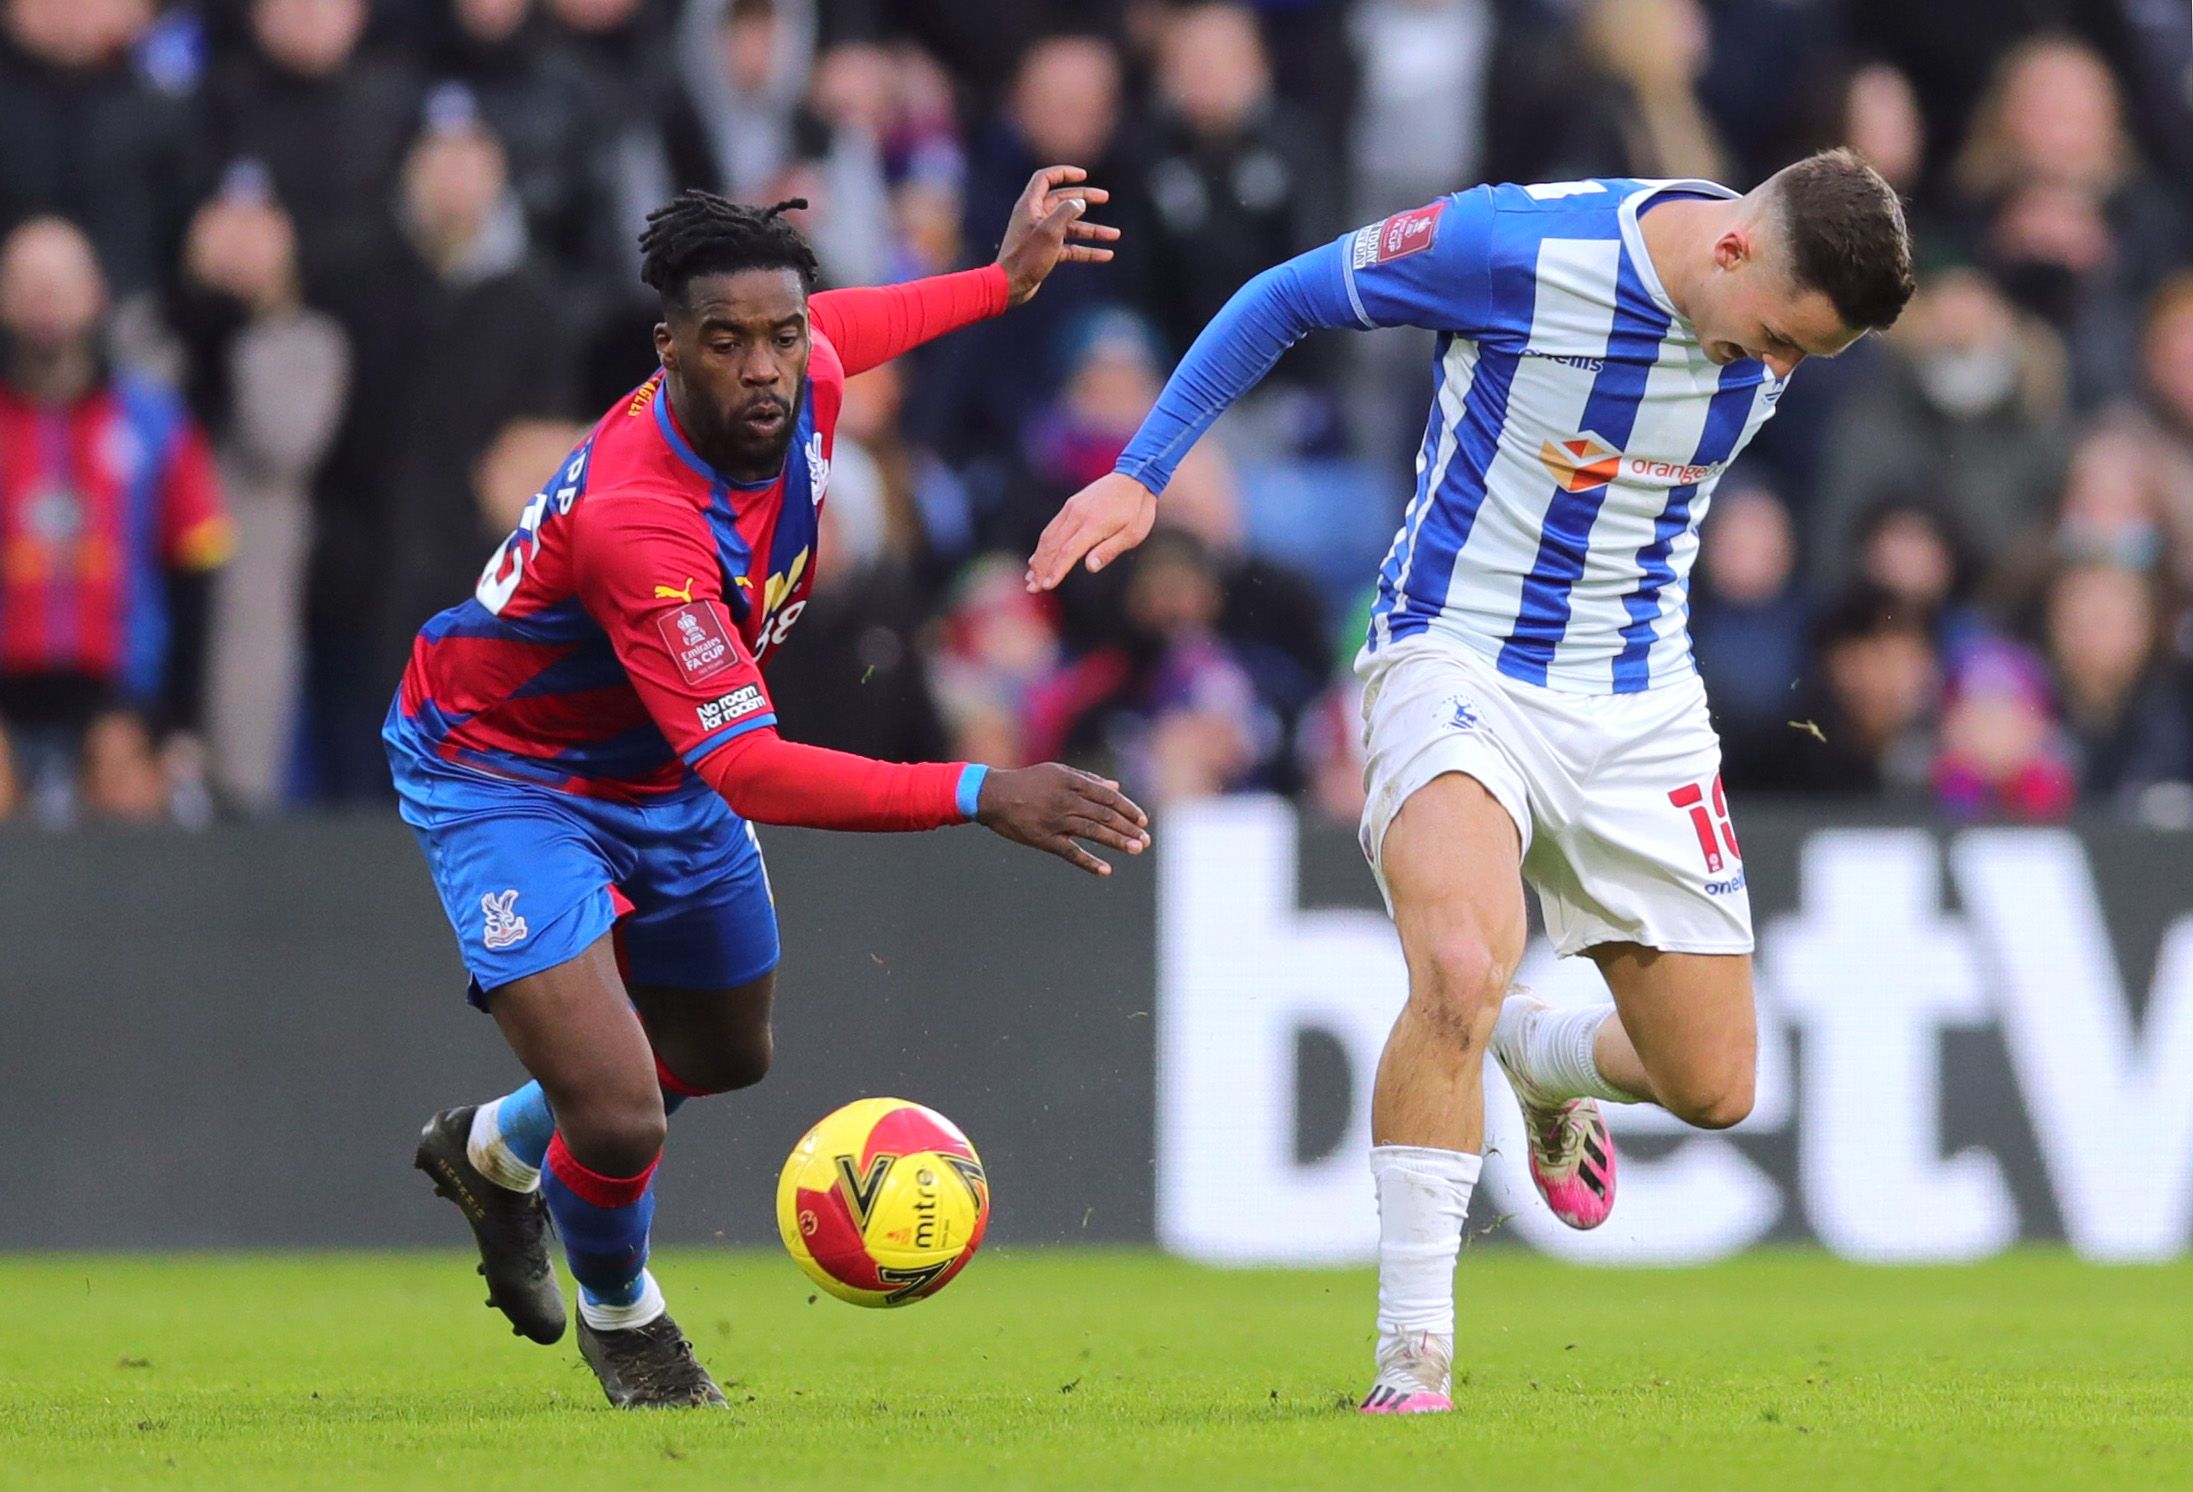 Soccer Football - FA Cup - Fourth Round - Crystal Palace v Hartlepool United - Selhurst Park, London, Britain - February 5, 2022 Hartlepool United's Luke Molyneux in action with Crystal Palace's Jeffrey Schlupp REUTERS/Chris Radburn